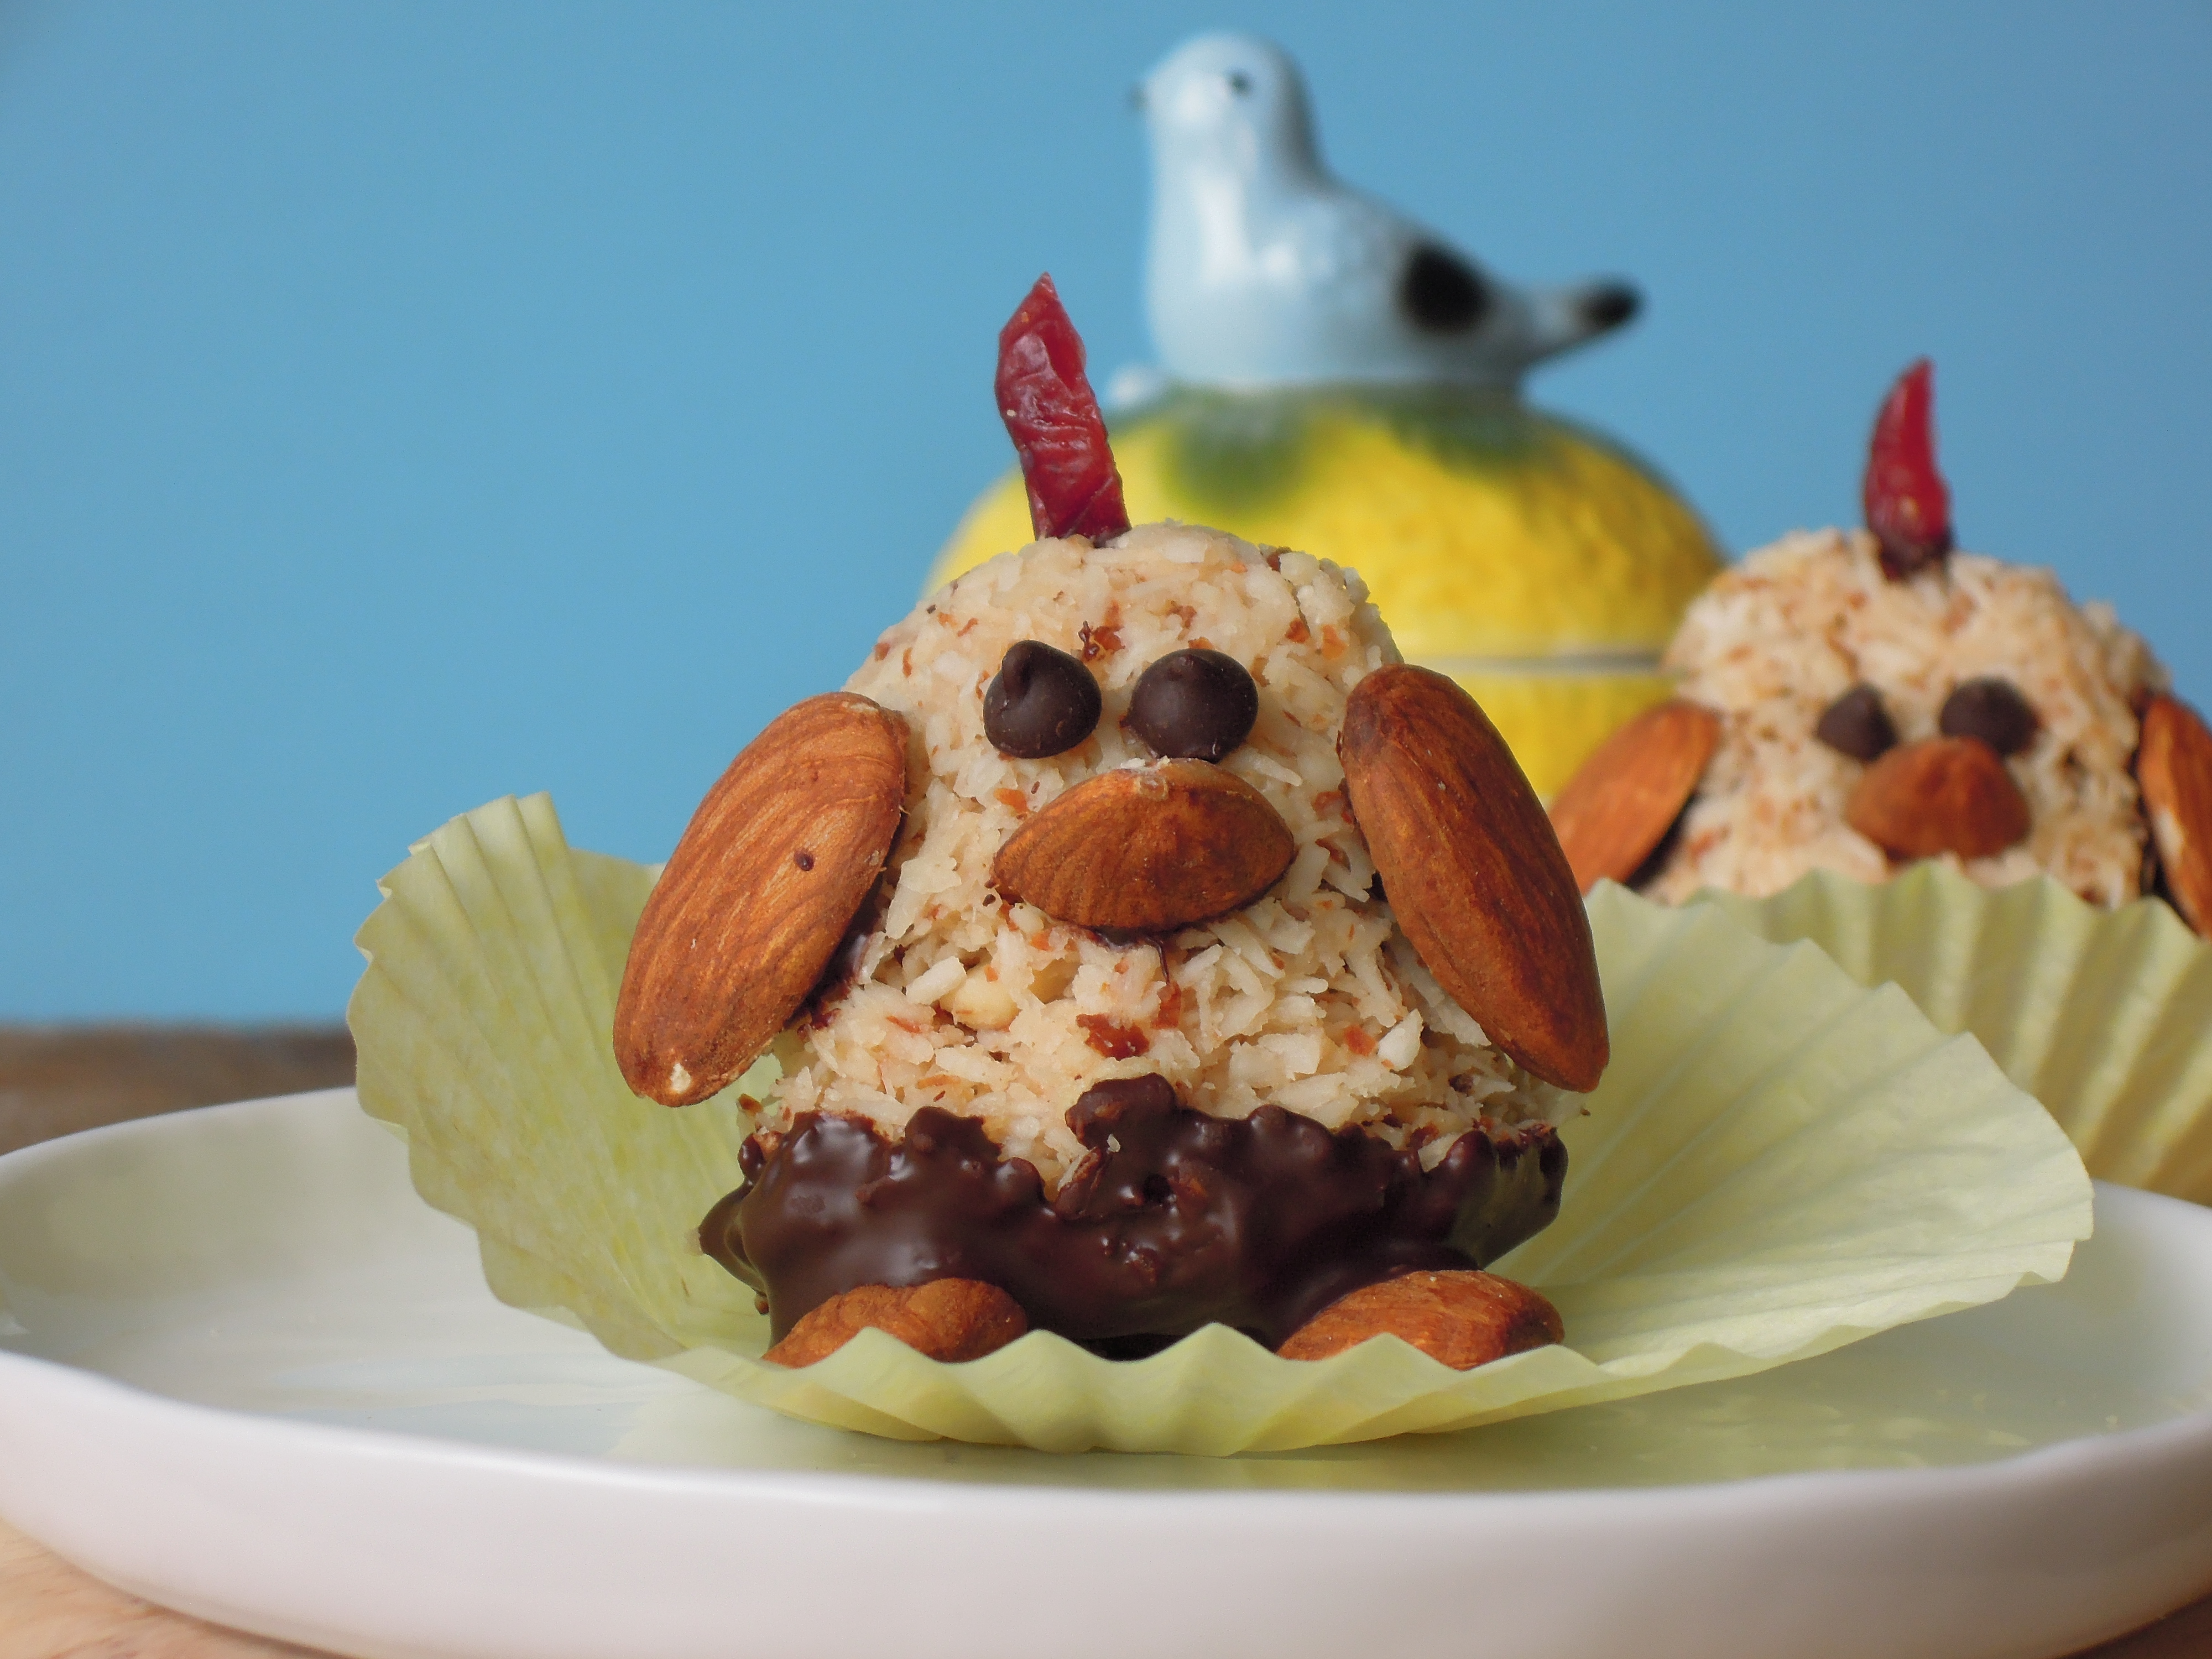 Easy-to-assemble Baby Chick Macaroons; perfect for an Easter treat!